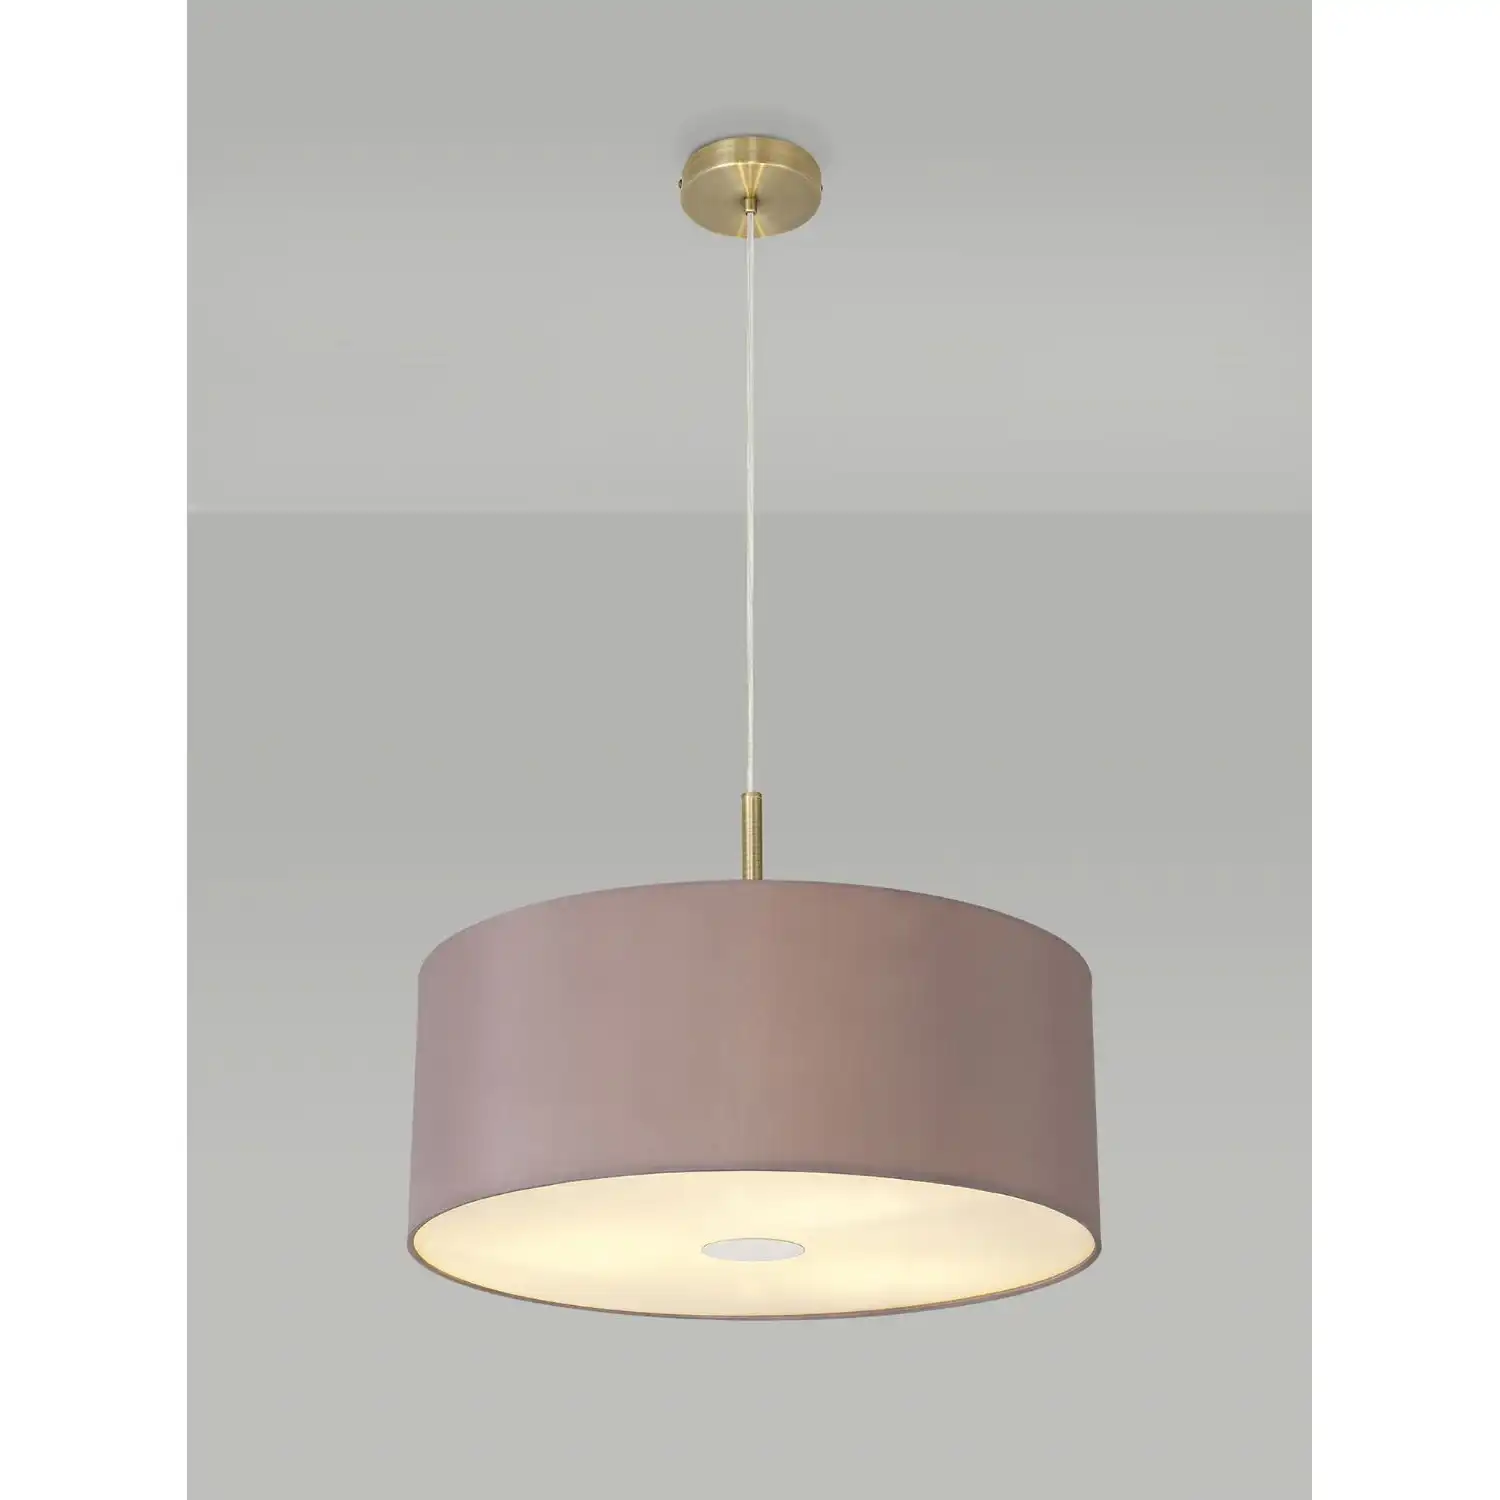 Baymont Antique Brass 3m 3 Light E27 Single Pendant c w 500 x 200mm Dual Faux Silk Fabric Shade, Taupe Halo Gold And 500mm Frosted AB Acrylic Diffuser